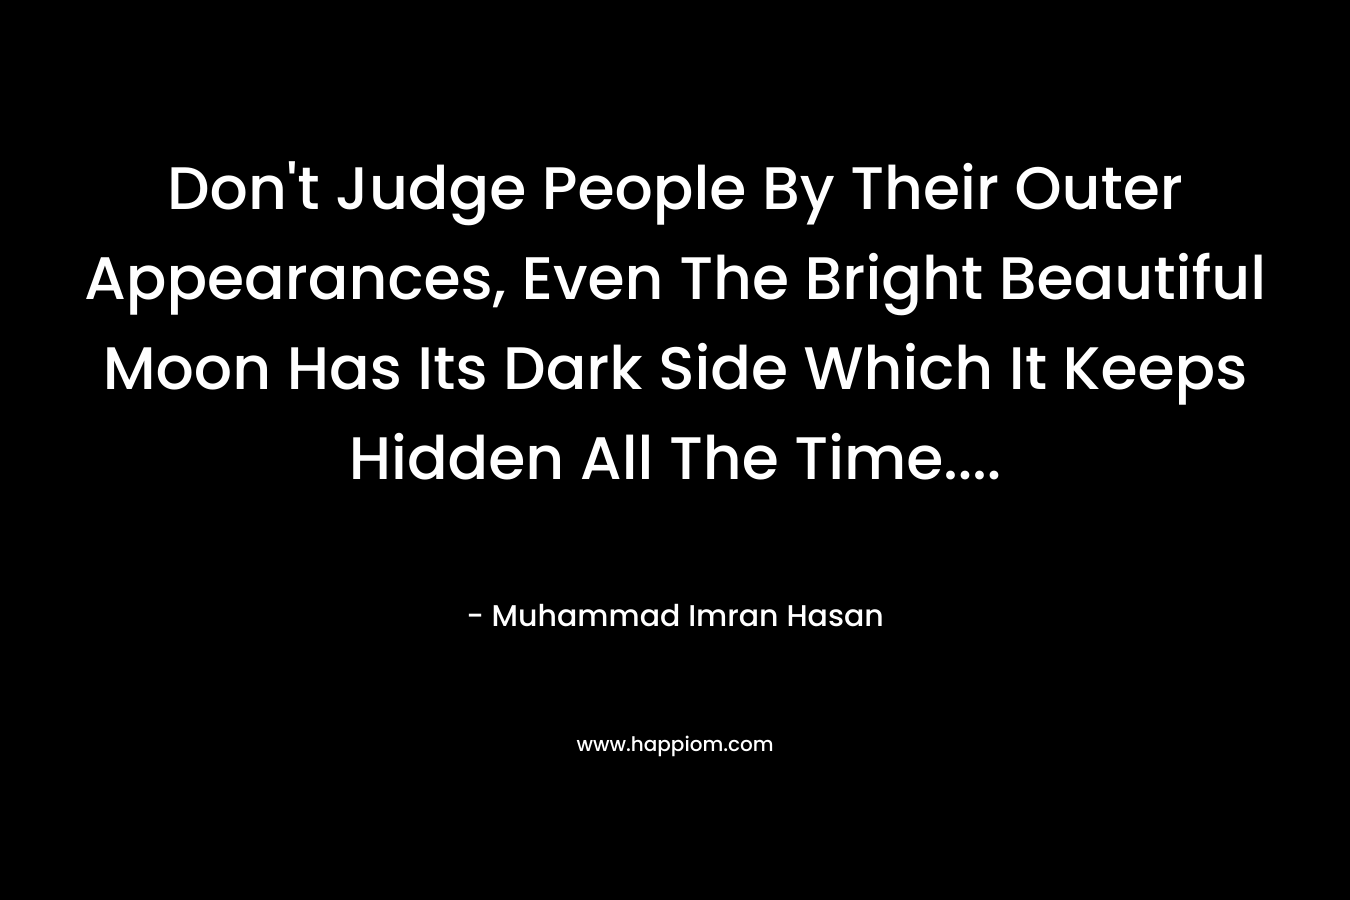 Don't Judge People By Their Outer Appearances, Even The Bright Beautiful Moon Has Its Dark Side Which It Keeps Hidden All The Time....